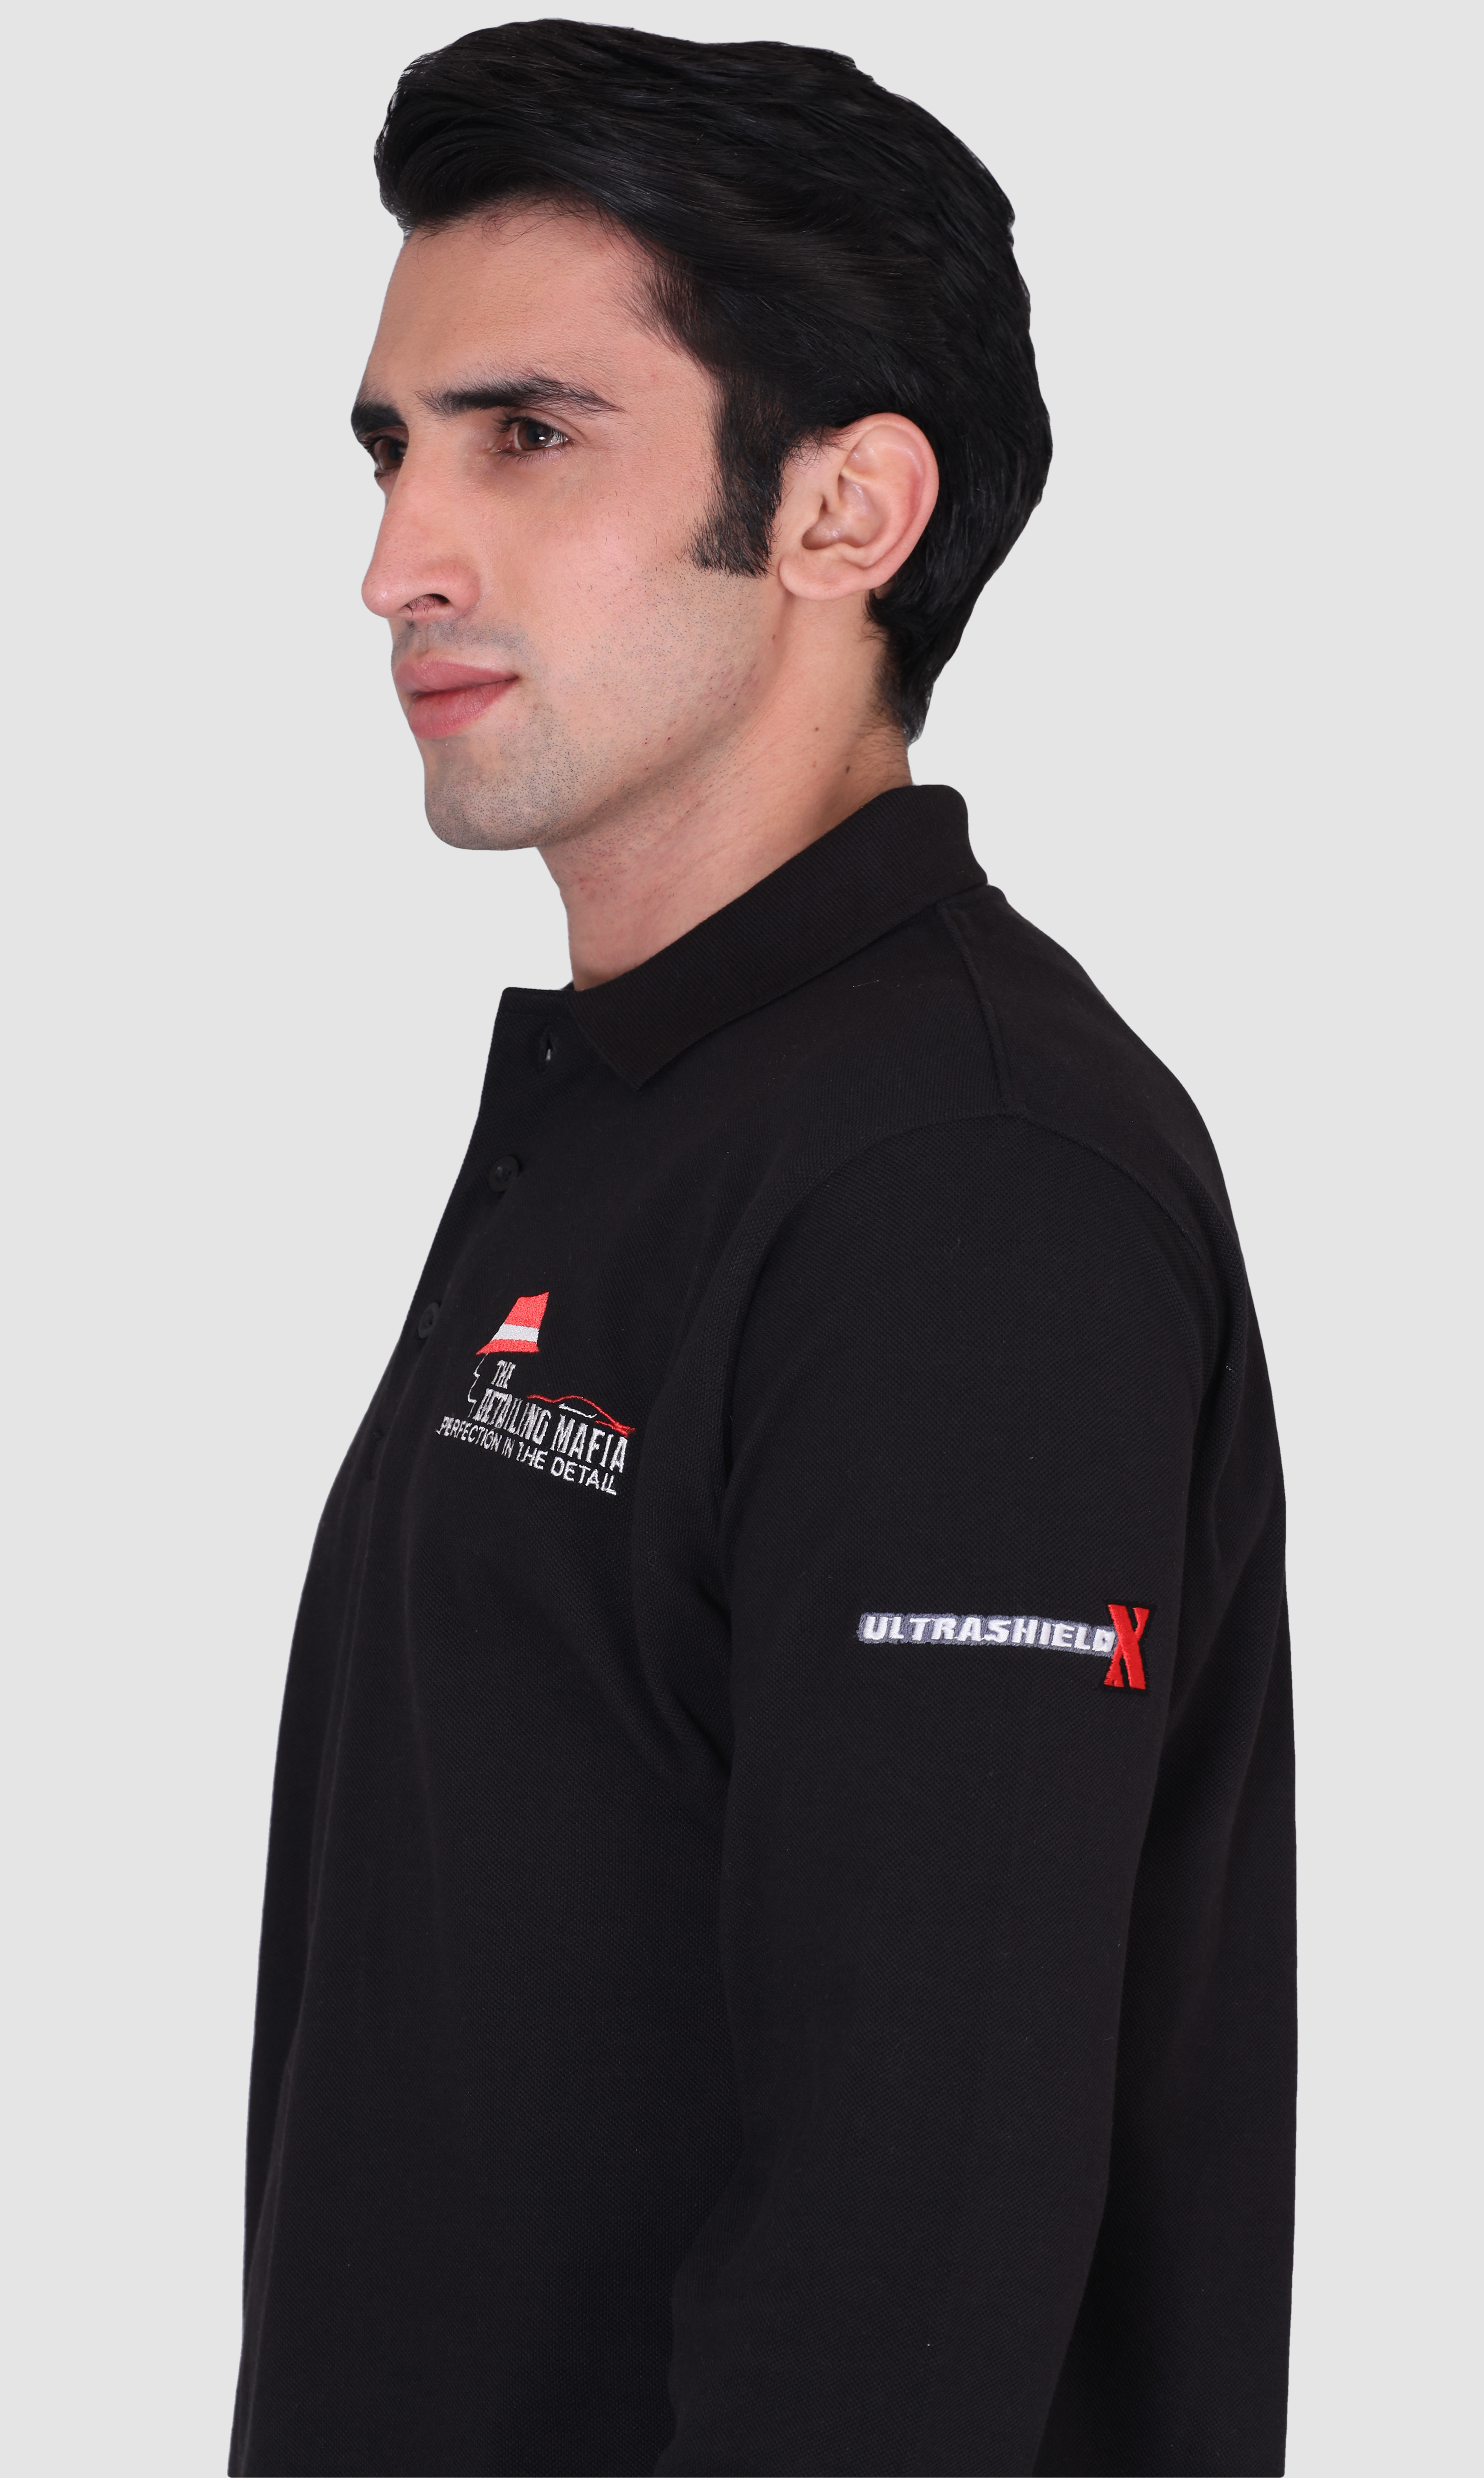 The detailing mafia black promotional polo t-shirts supplier 